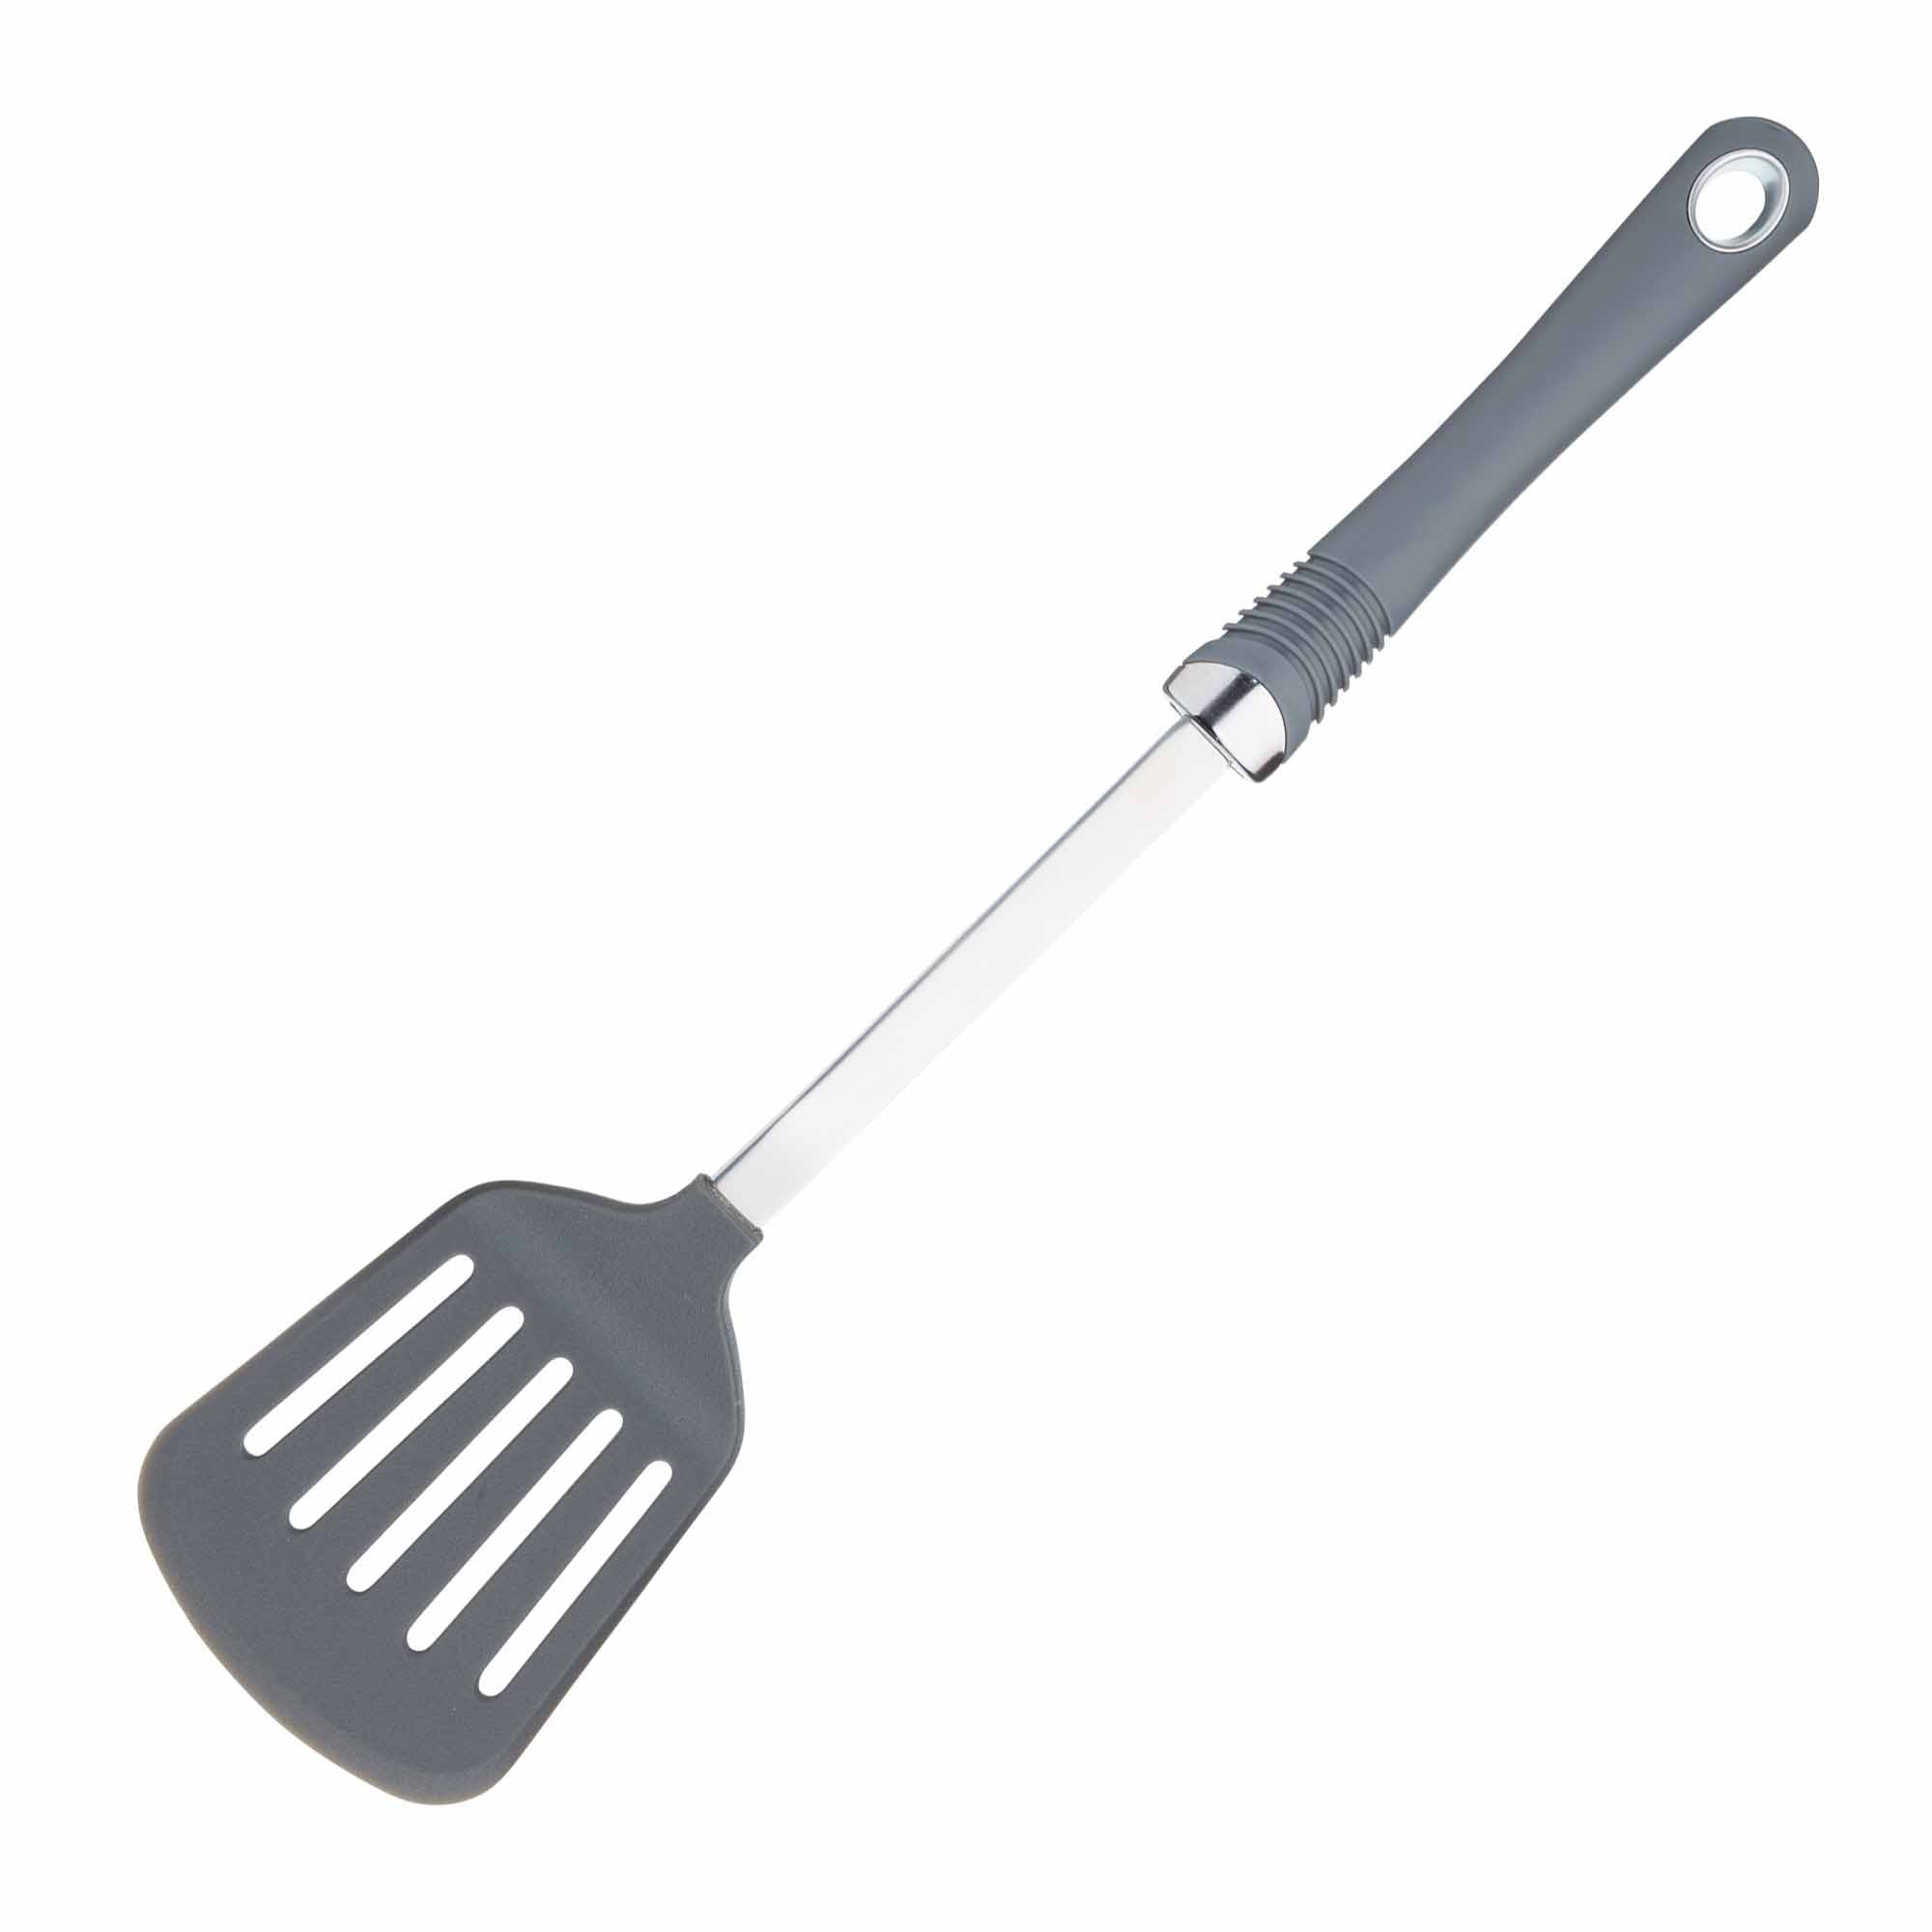 KitchenCraft Professional Nylon Slotted Turner with Soft-Grip Handle - The Cooks Cupboard Ltd